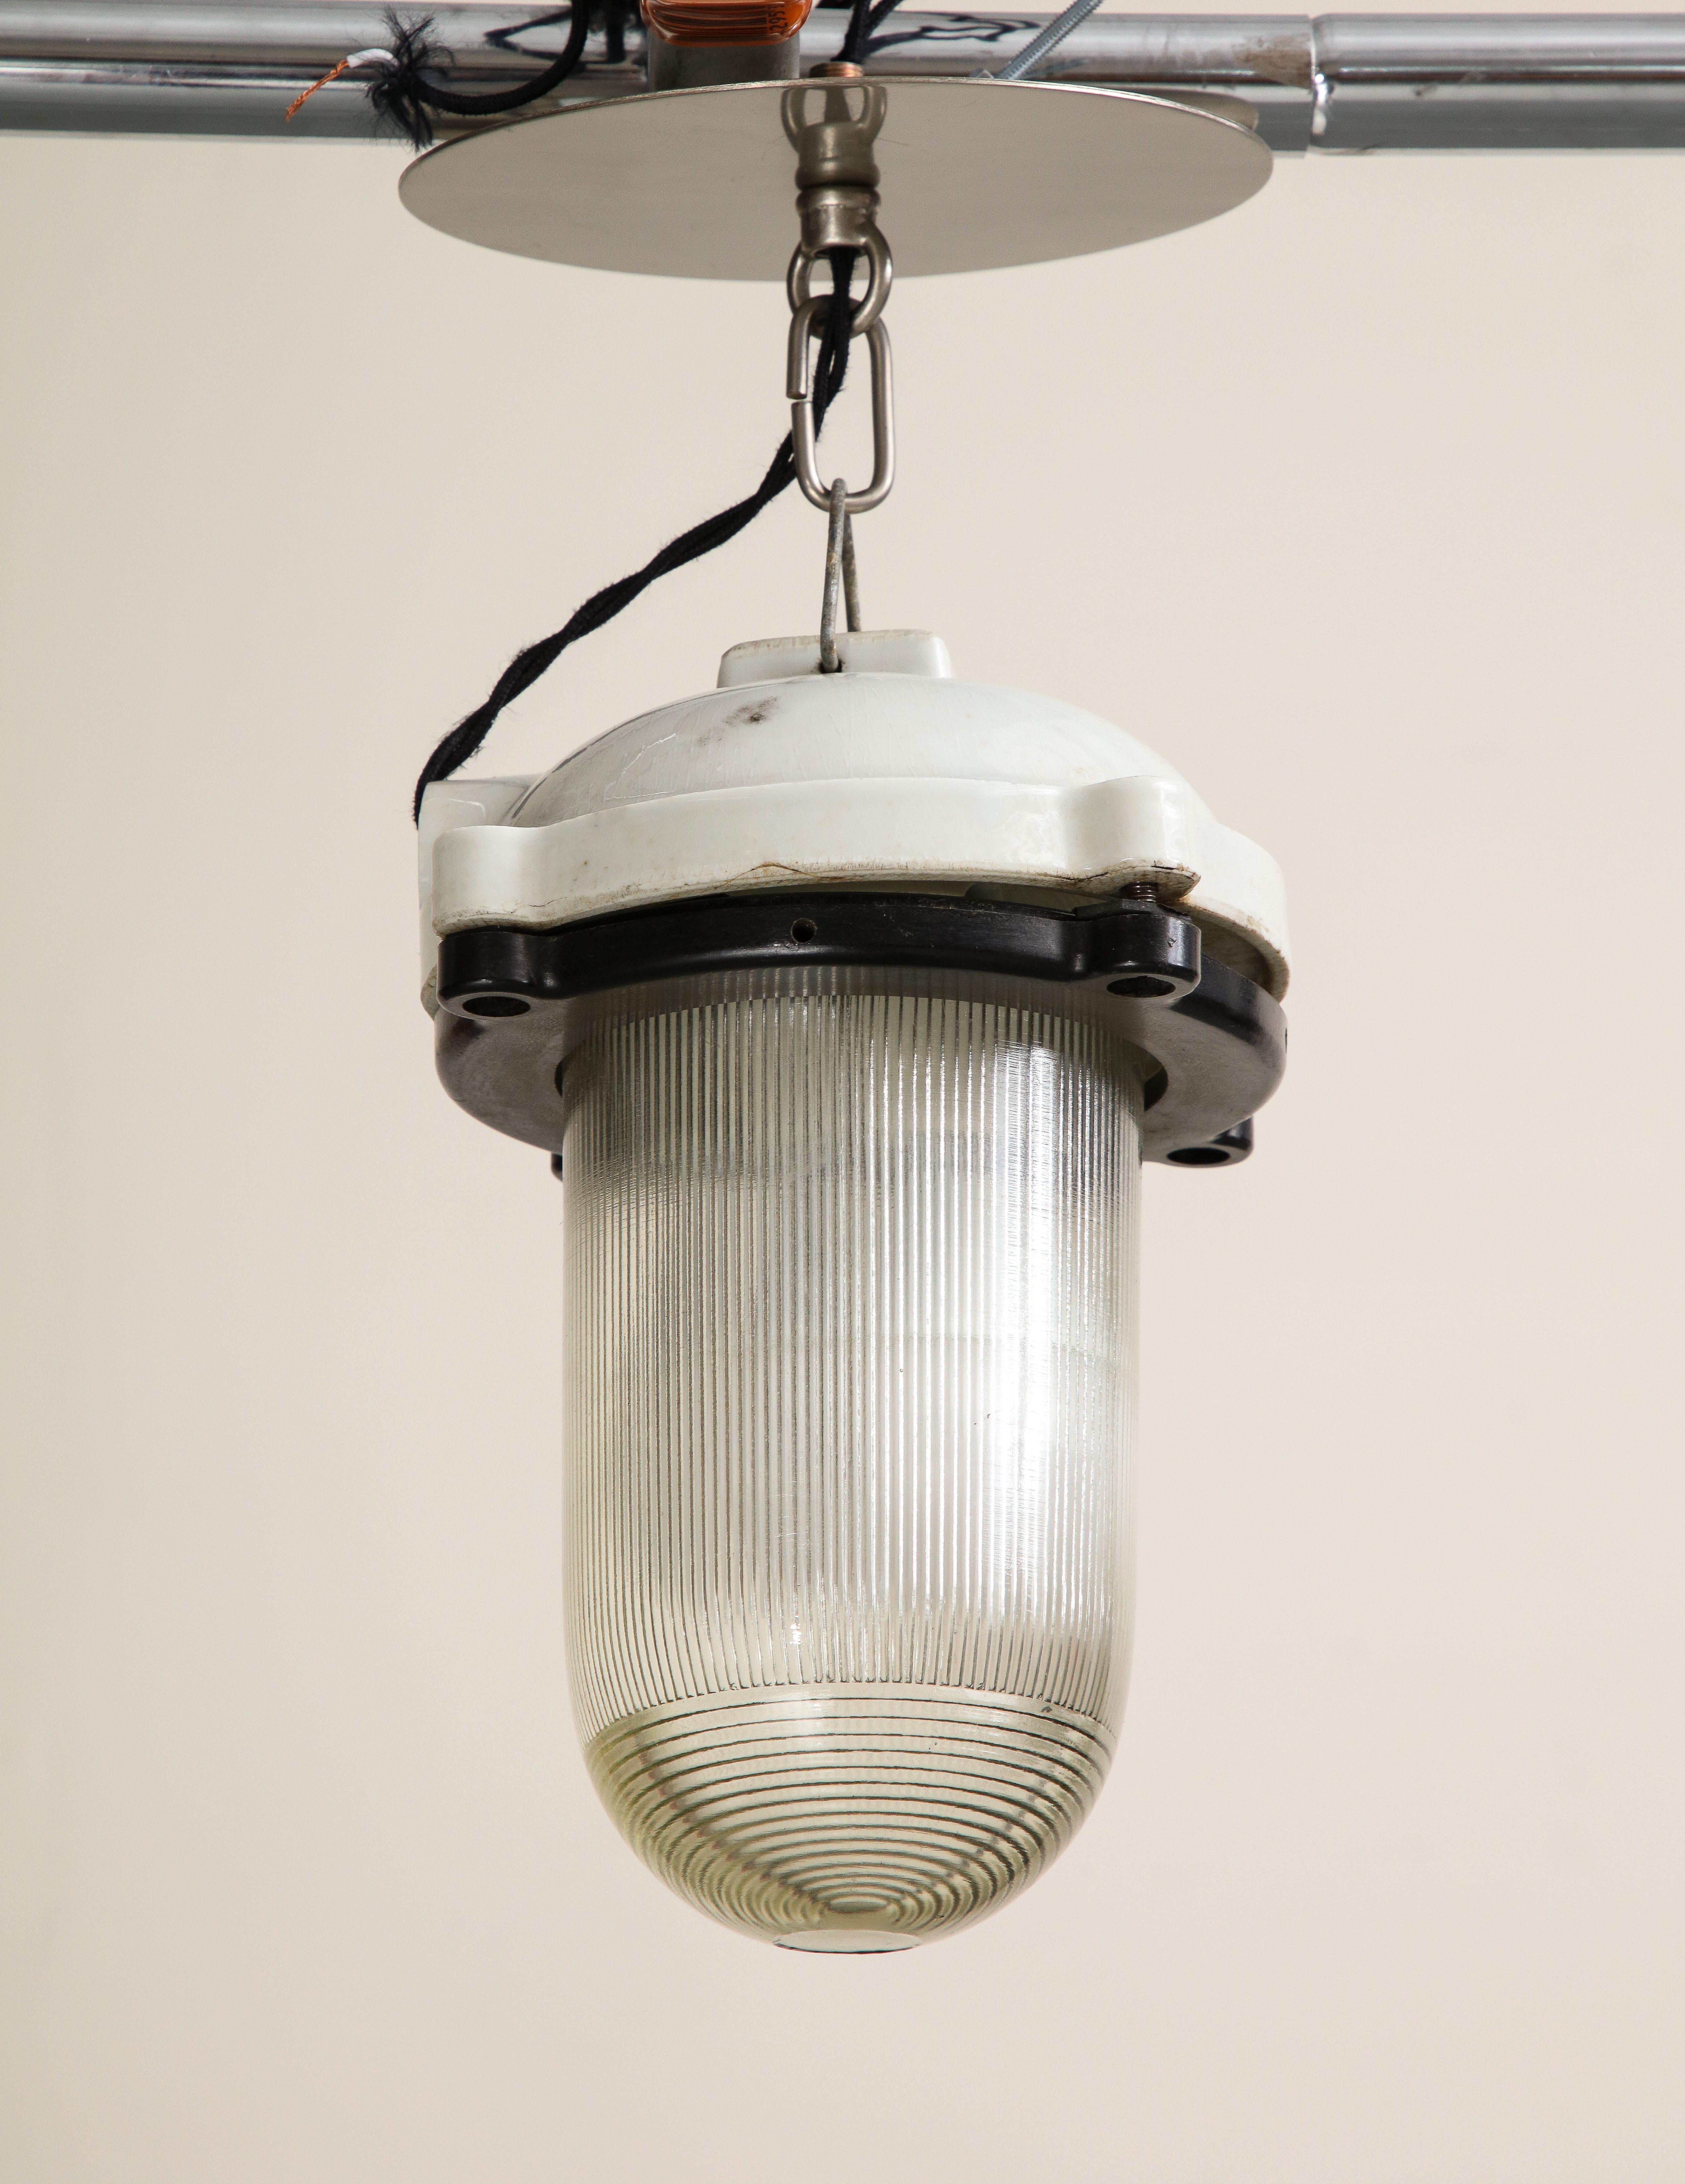 Vintage industrial pendant with reeded glass and white enamel cast iron top, mid 20th century. Wired for USA, good working condition. 